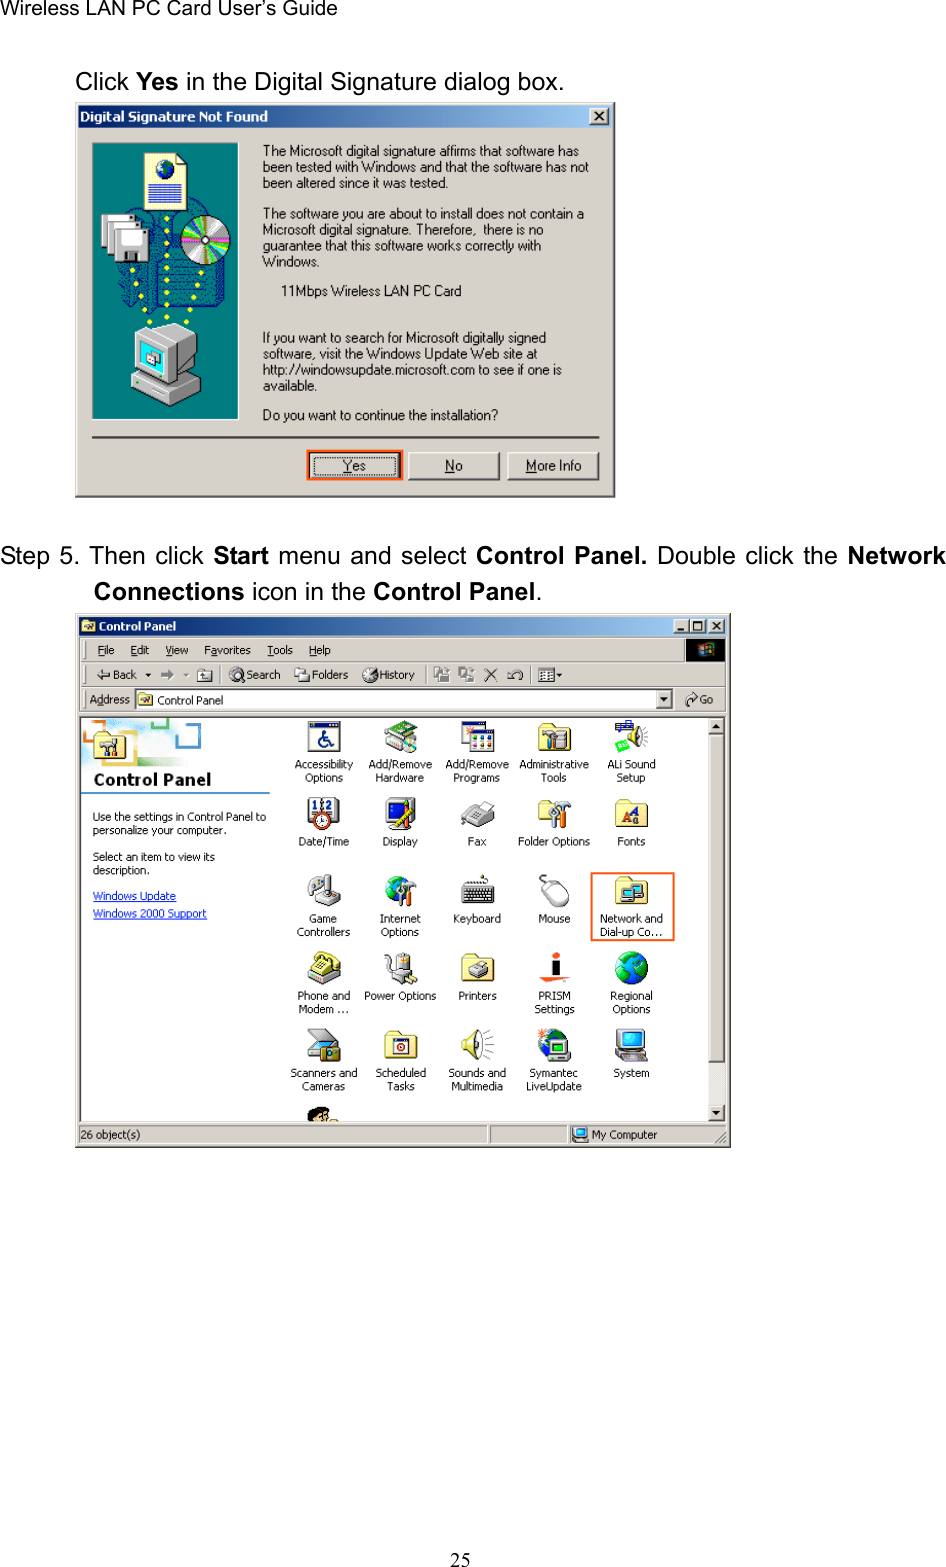 Wireless LAN PC Card User’s Guide25Click Yes in the Digital Signature dialog box.Step 5. Then click Start menu and select Control Panel. Double click the NetworkConnections icon in the Control Panel.